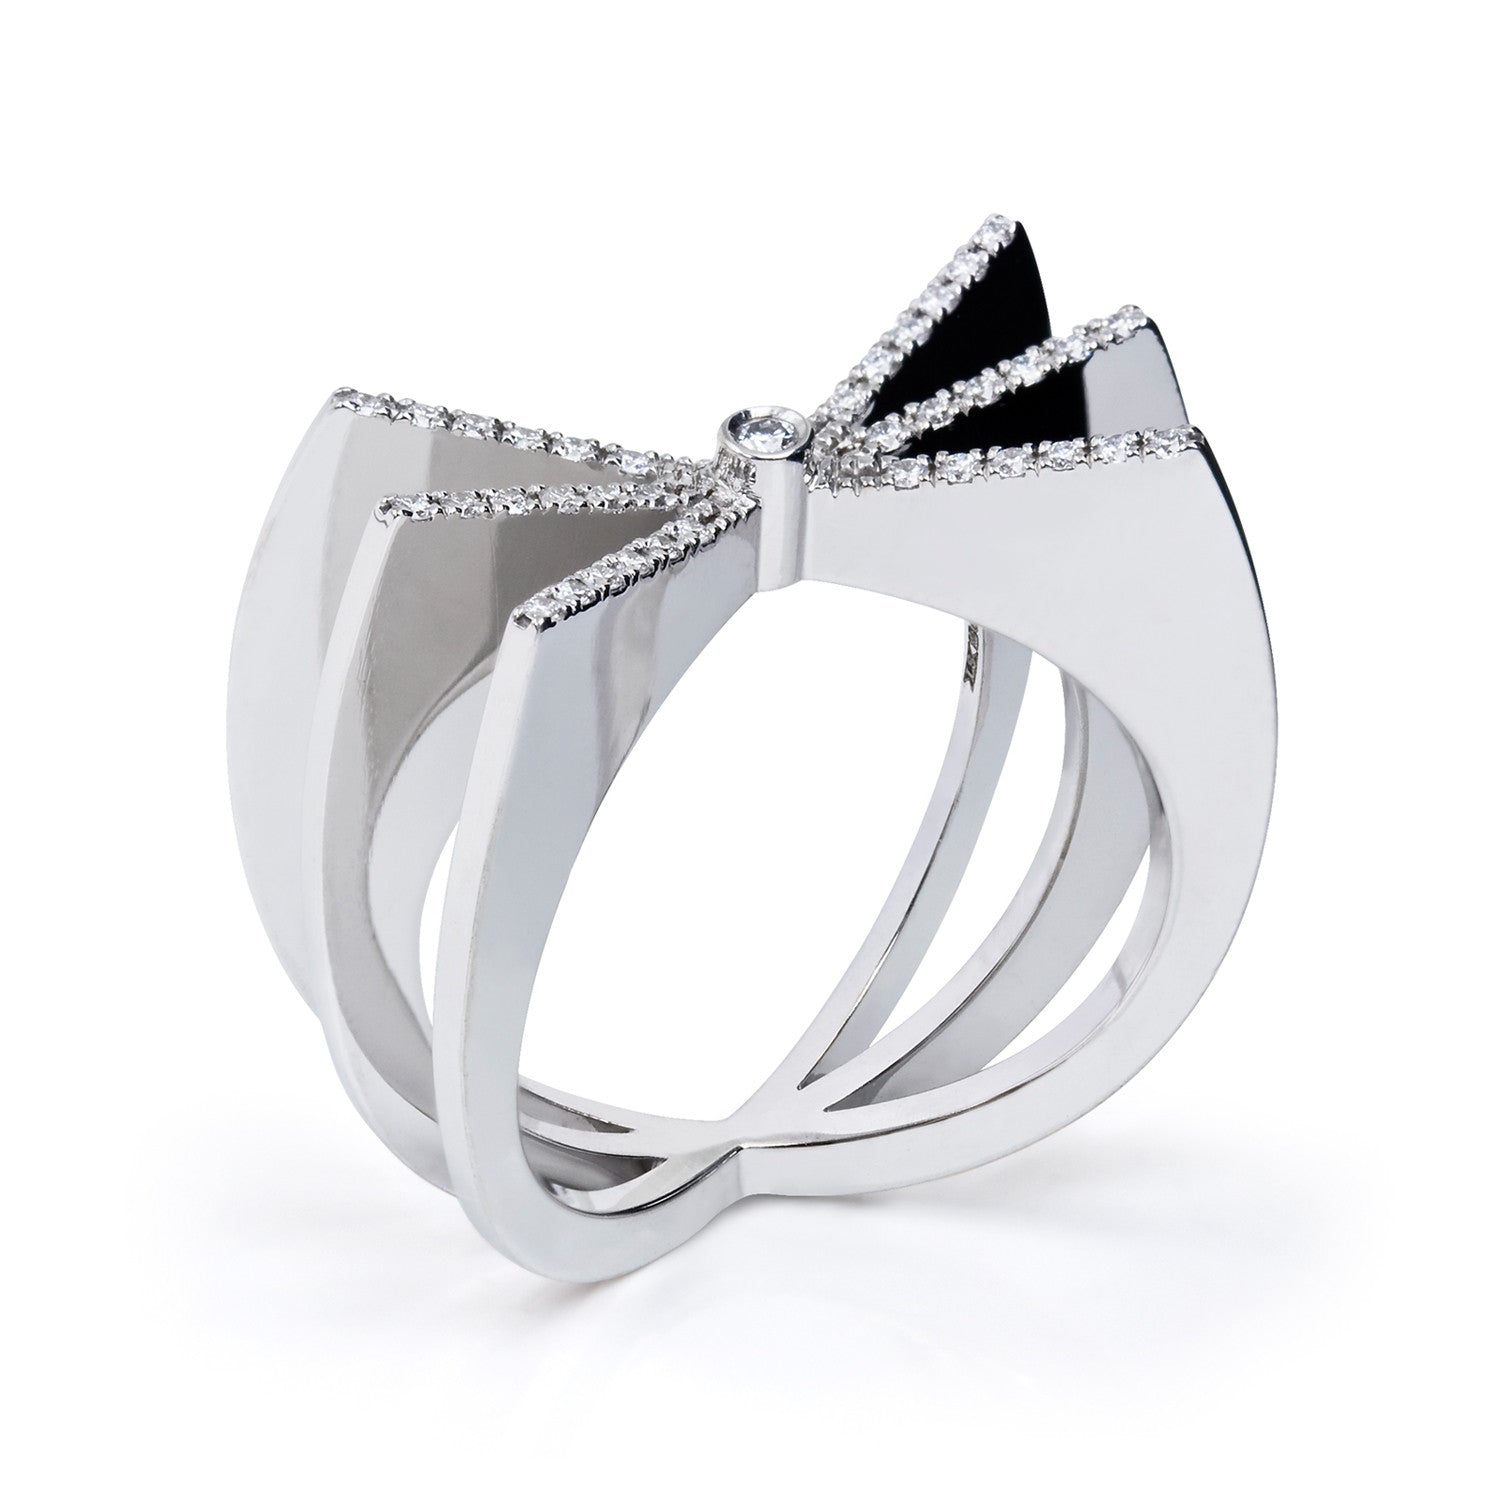 Bespoke Bow ring - 18ct white gold and conflict-free microset diamonds